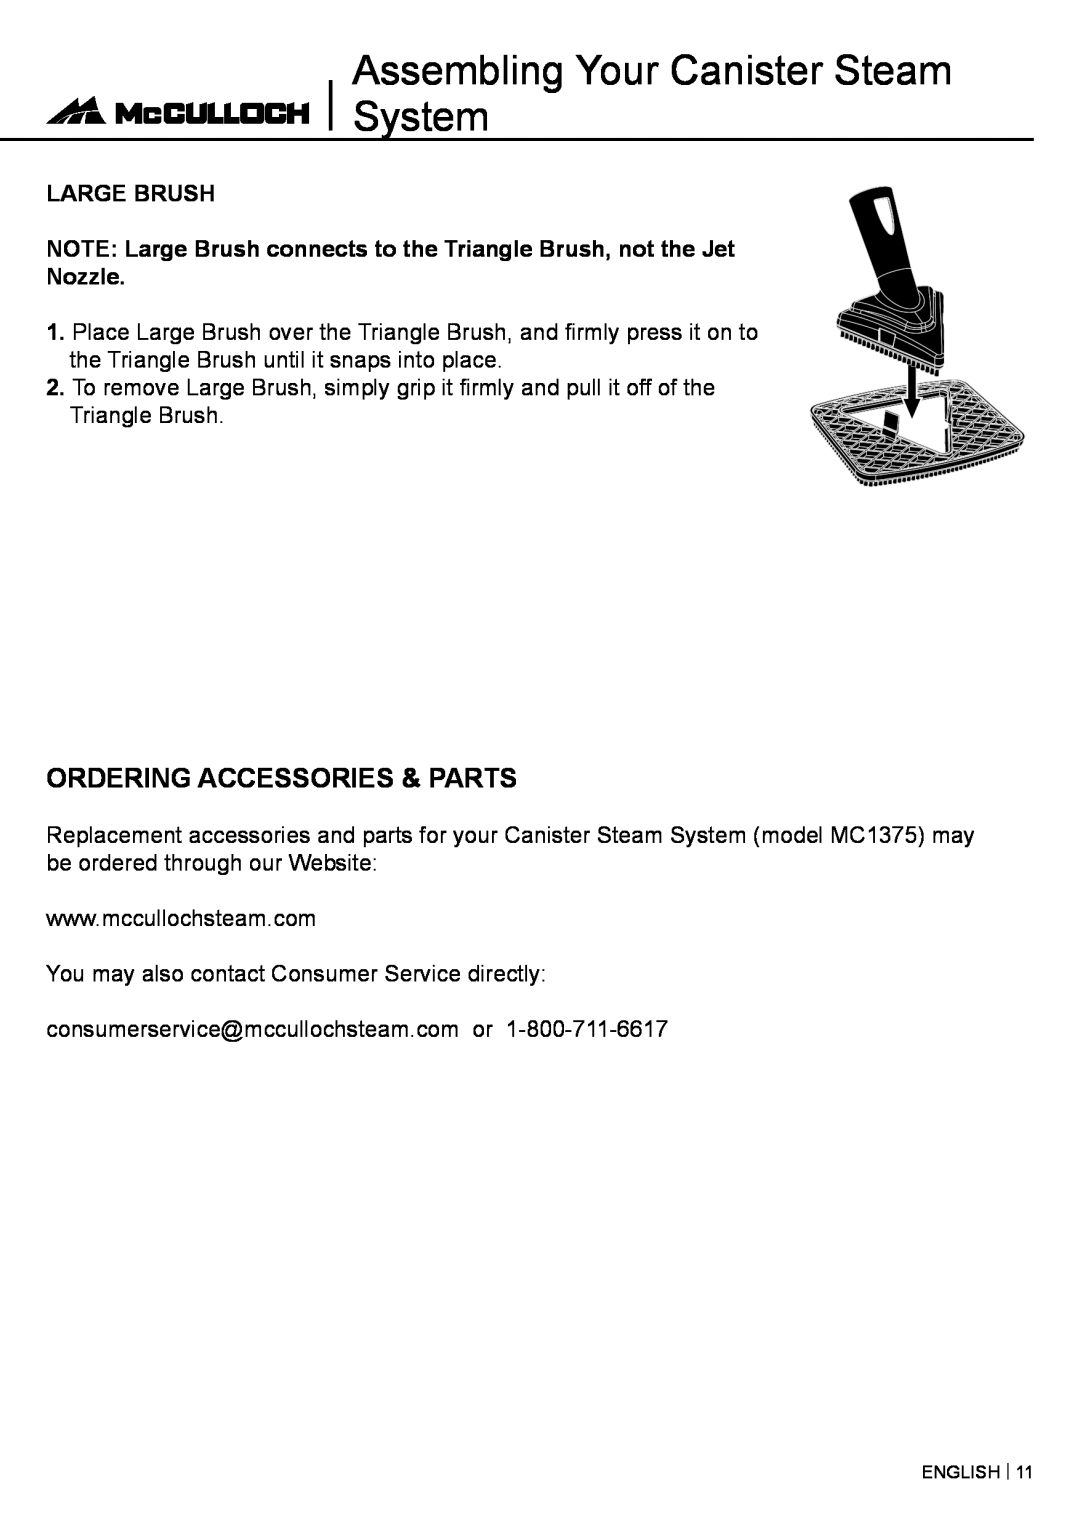 McCulloch MC1375 warranty Ordering Accessories & Parts, Assembling Your Canister Steam System, Large Brush 